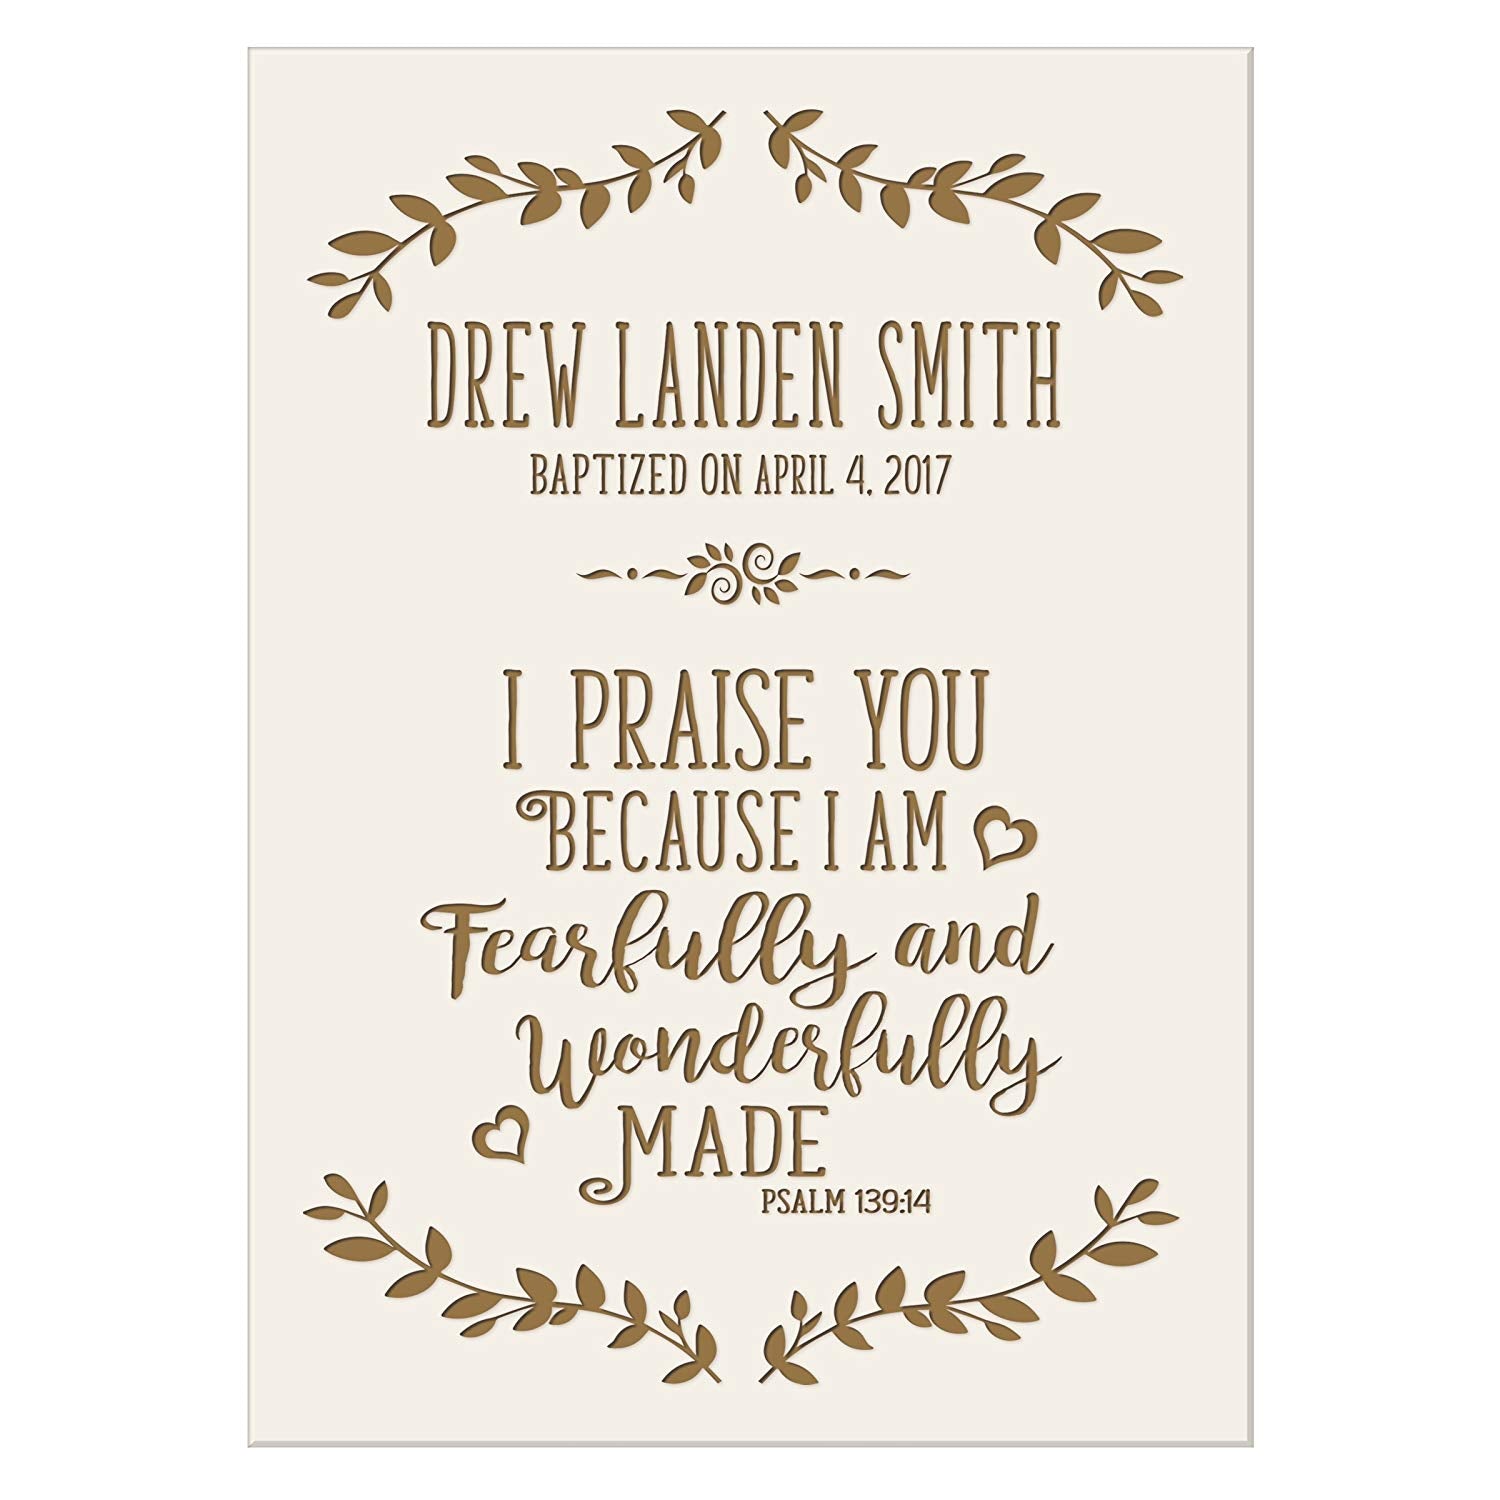 Personalized Baptism Wall Plaque - I Praise You - LifeSong Milestones